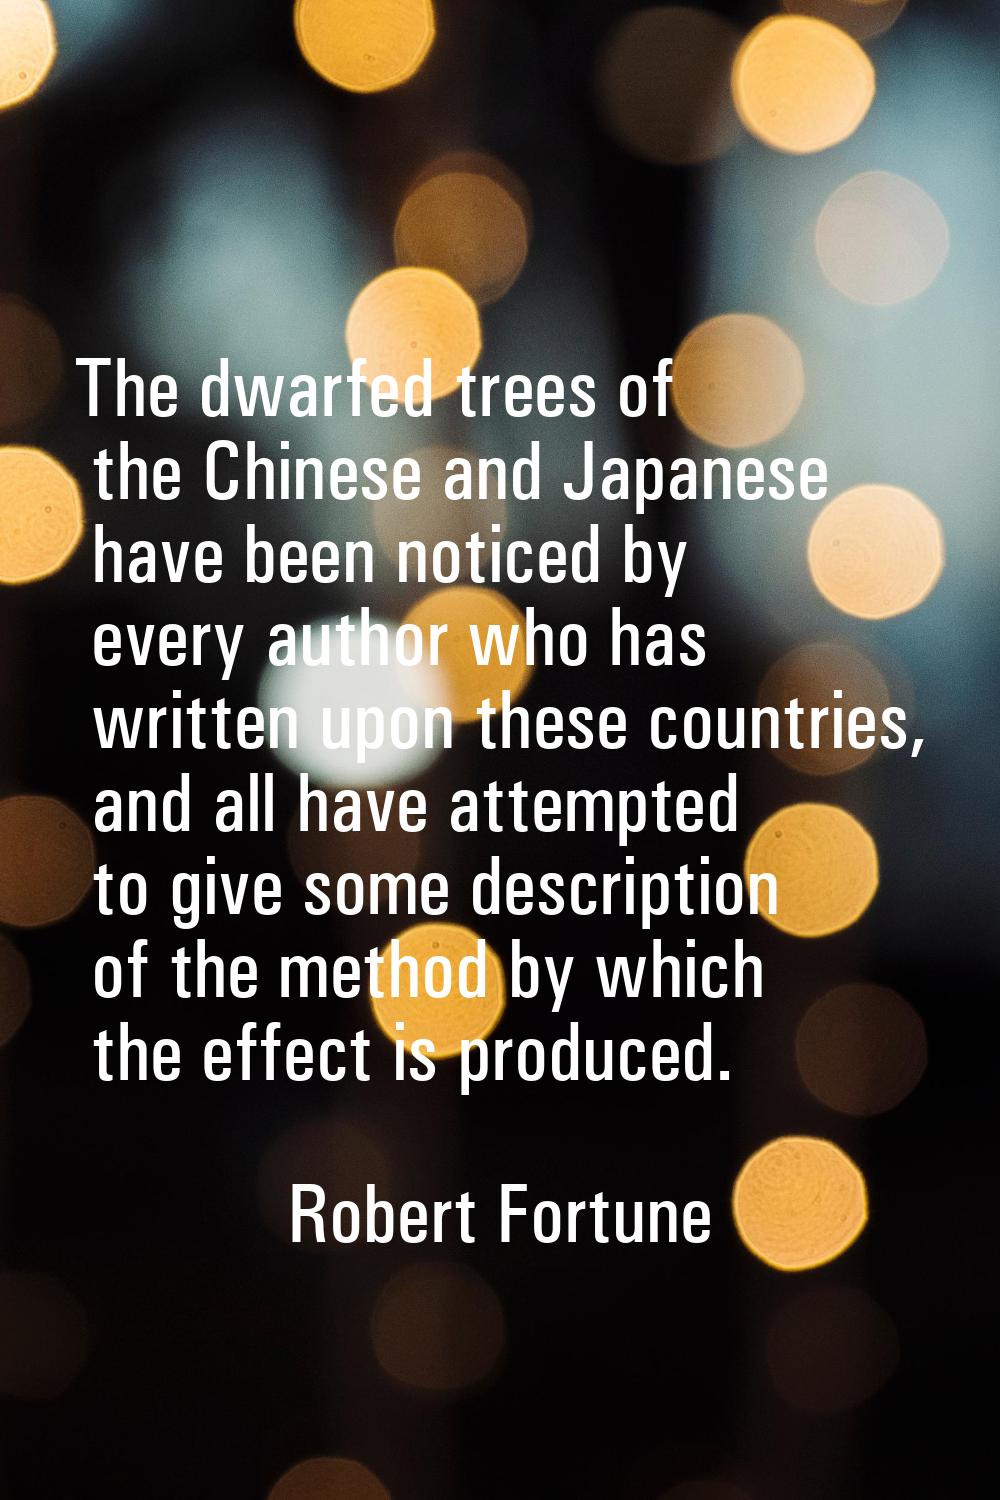 The dwarfed trees of the Chinese and Japanese have been noticed by every author who has written upo